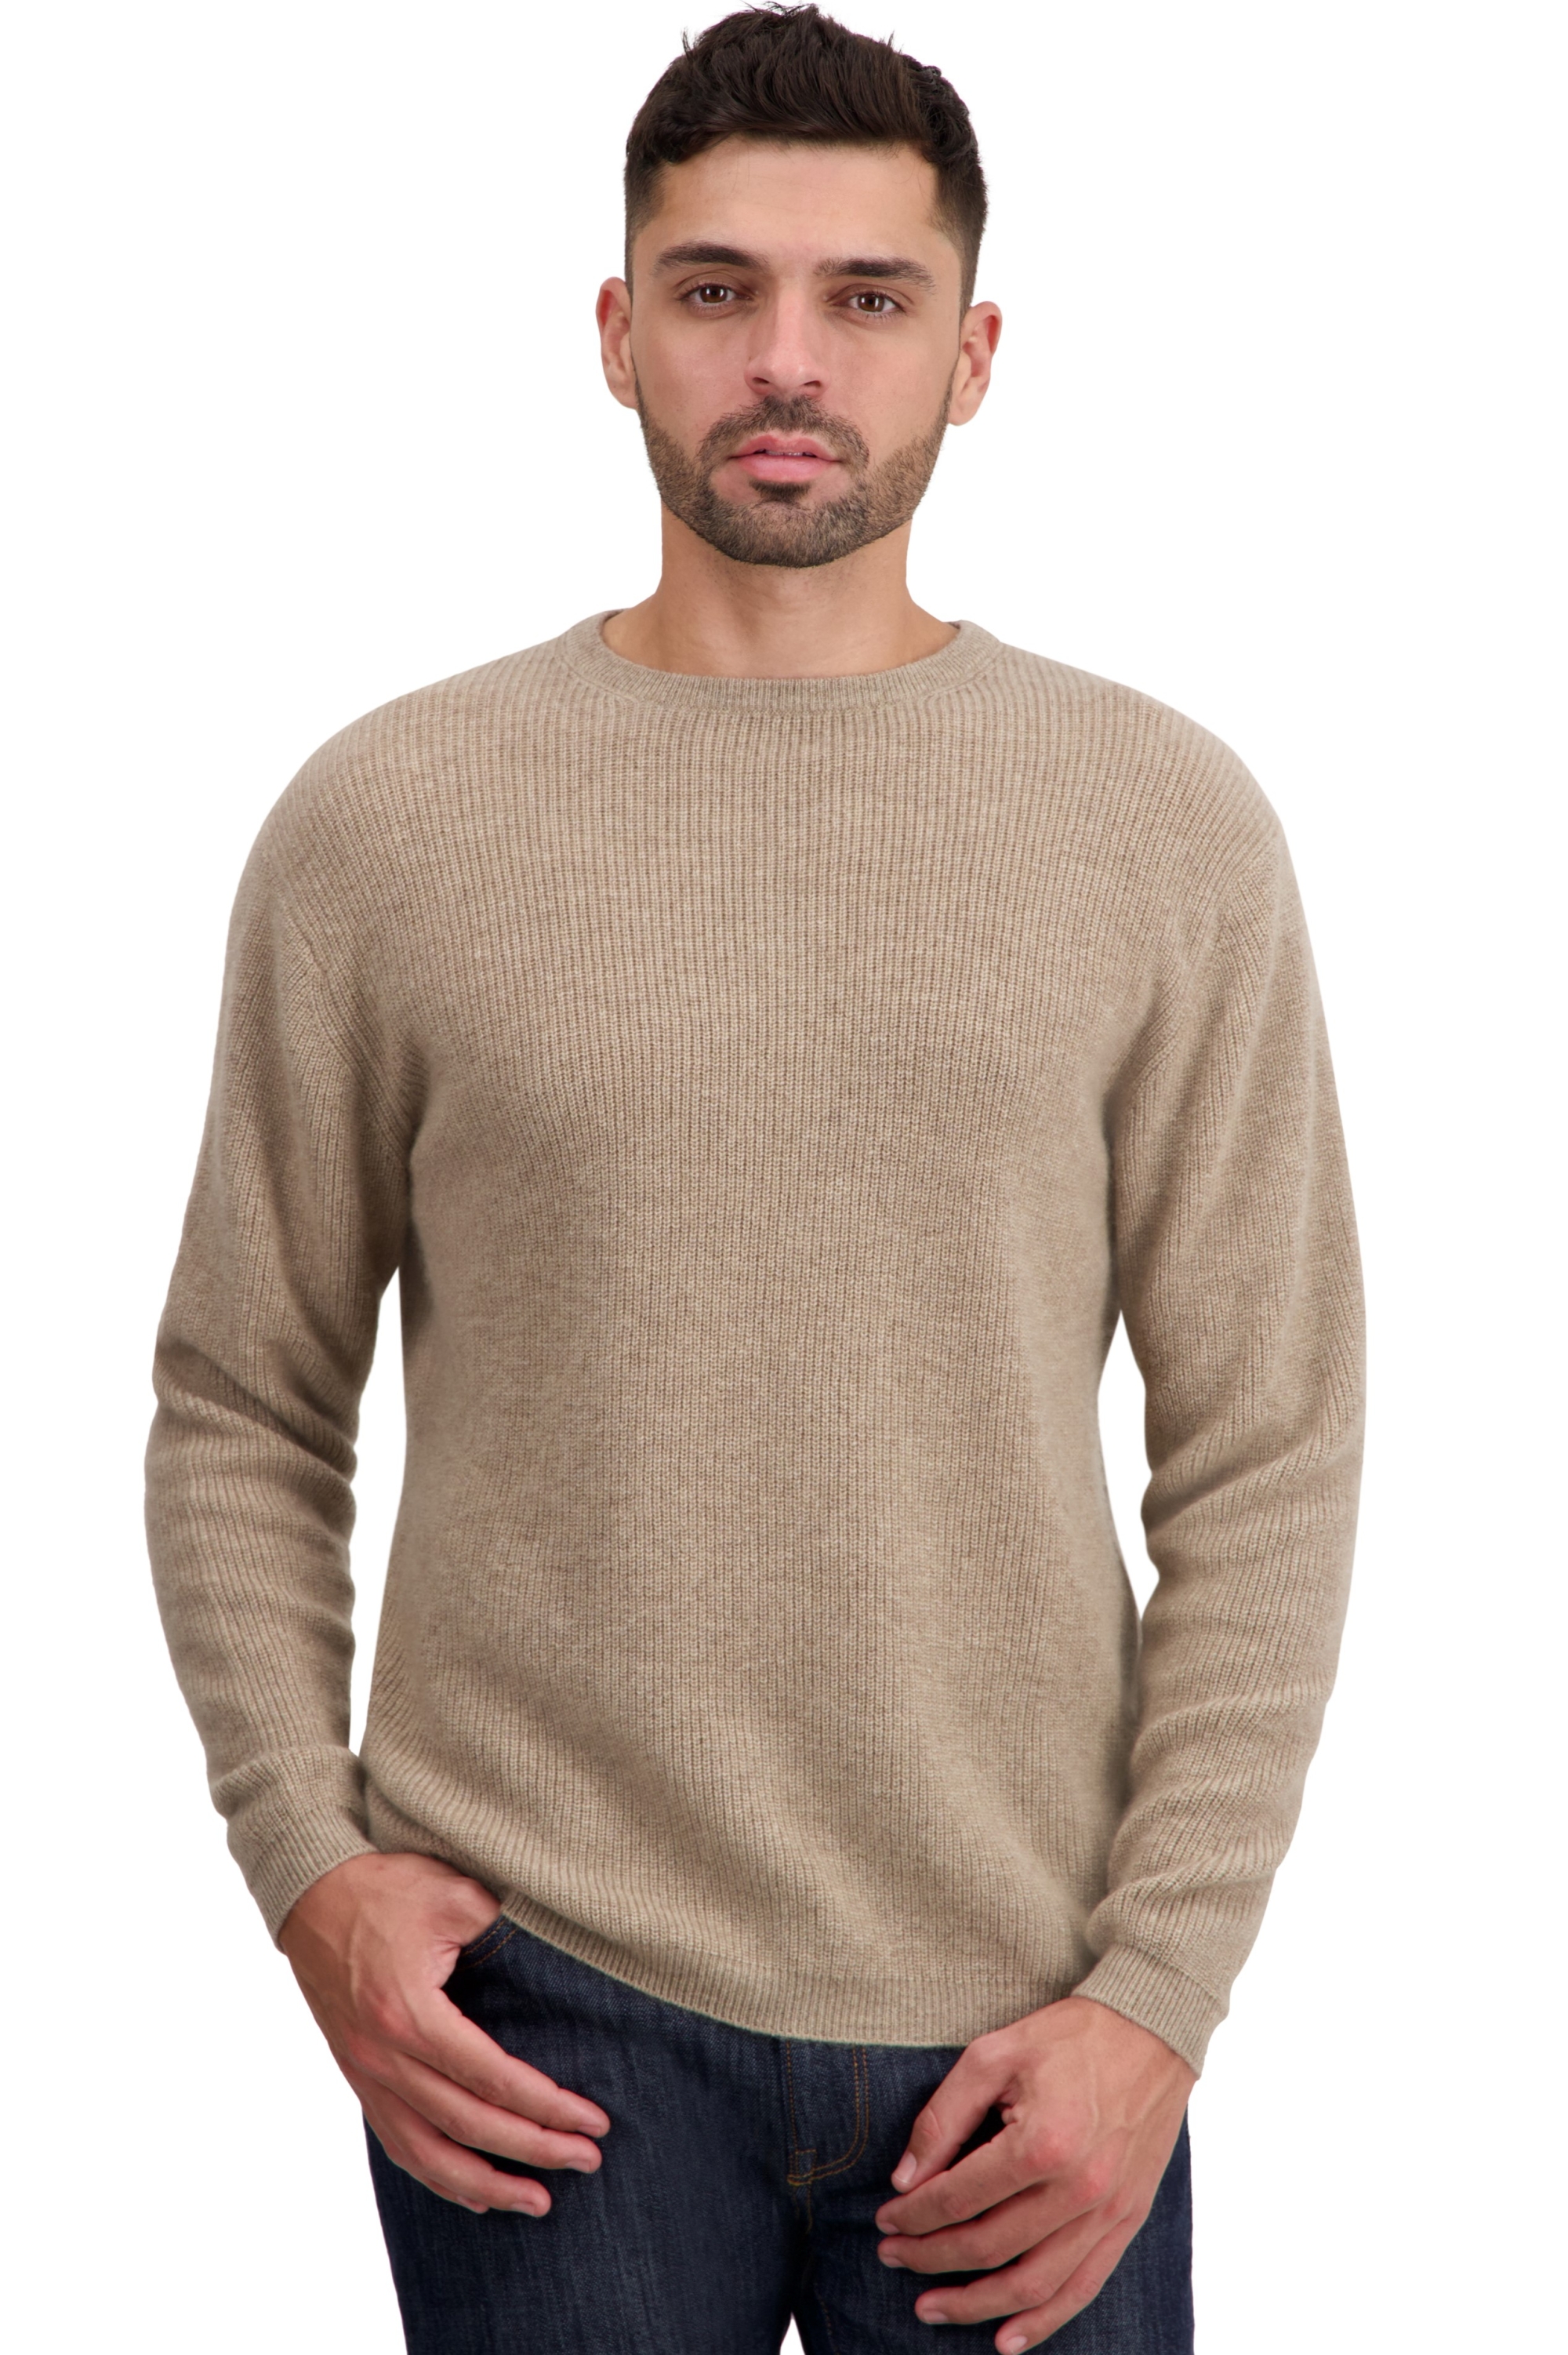 Cachemire pull homme taima natural brown 3xl